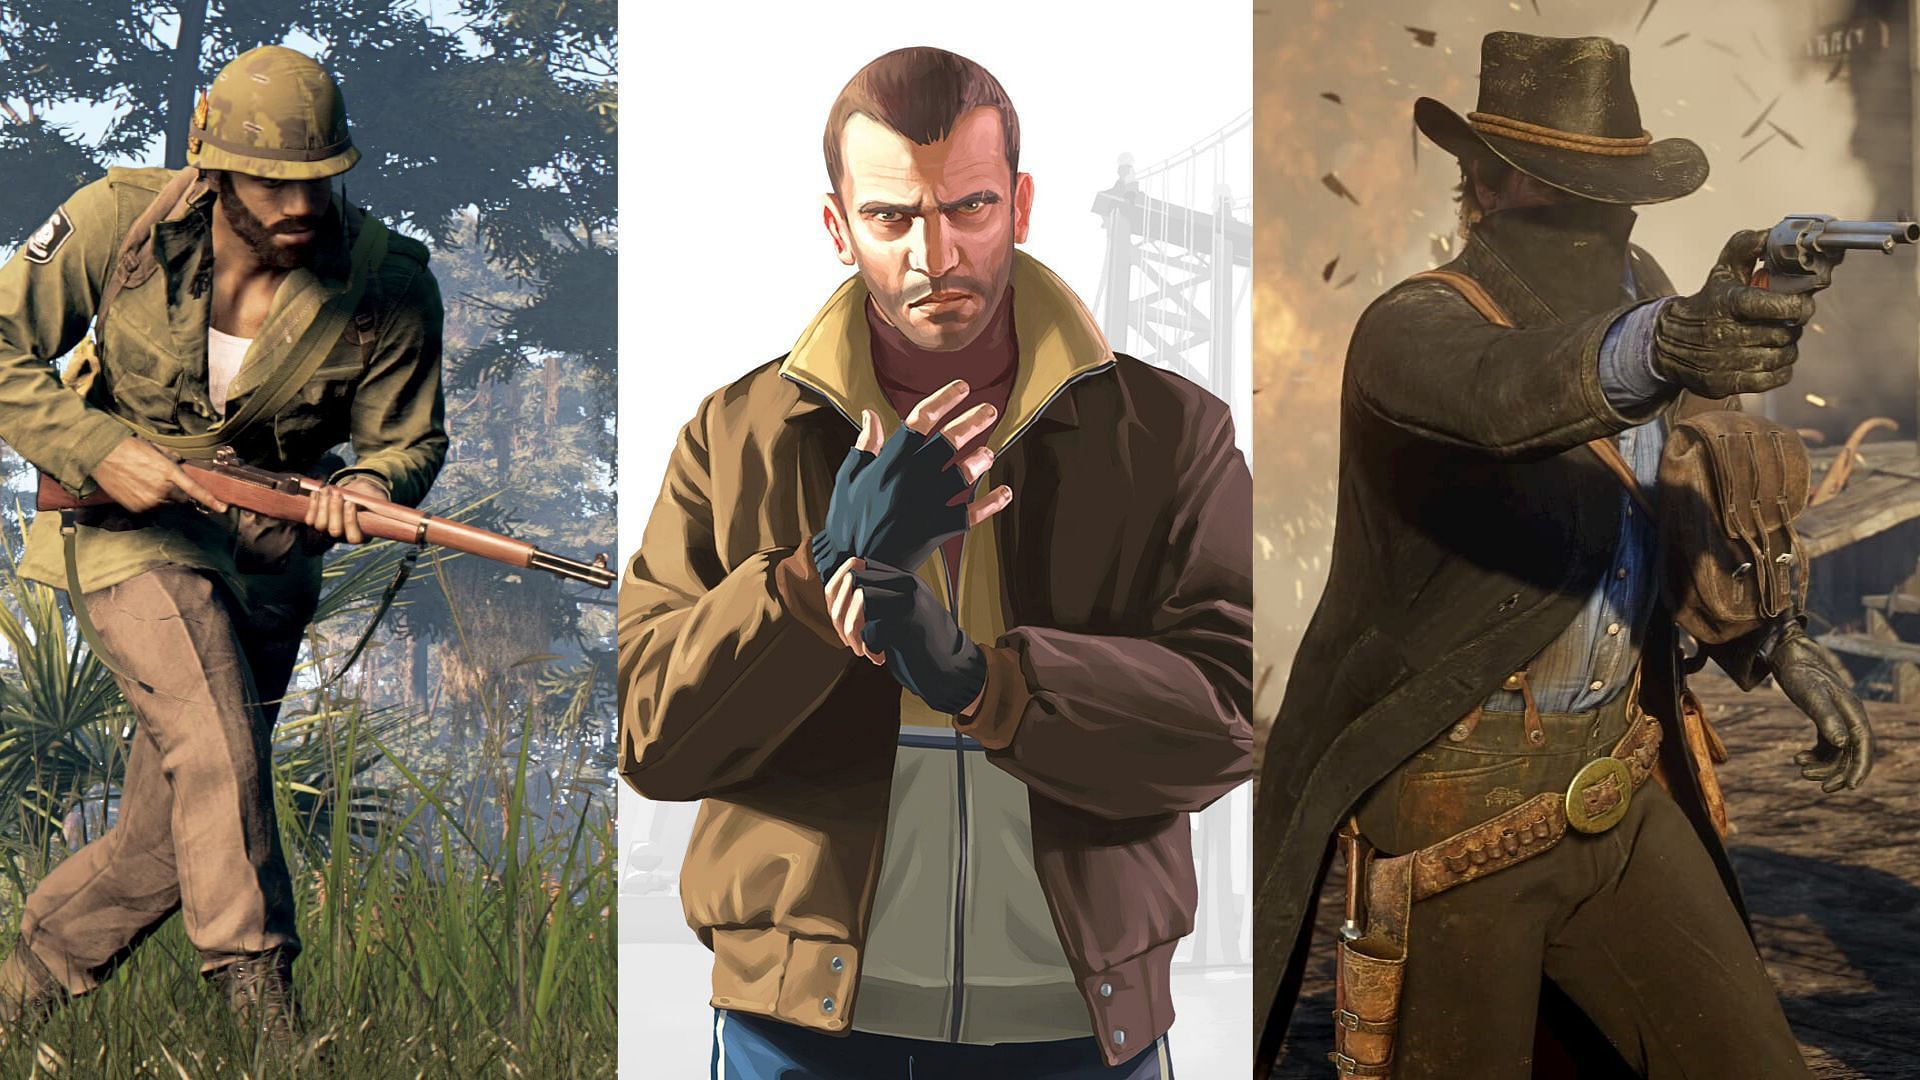 There are many AAA games to play while waiting for GTA 6 (Images via Rockstar Games, mafiagame.com)